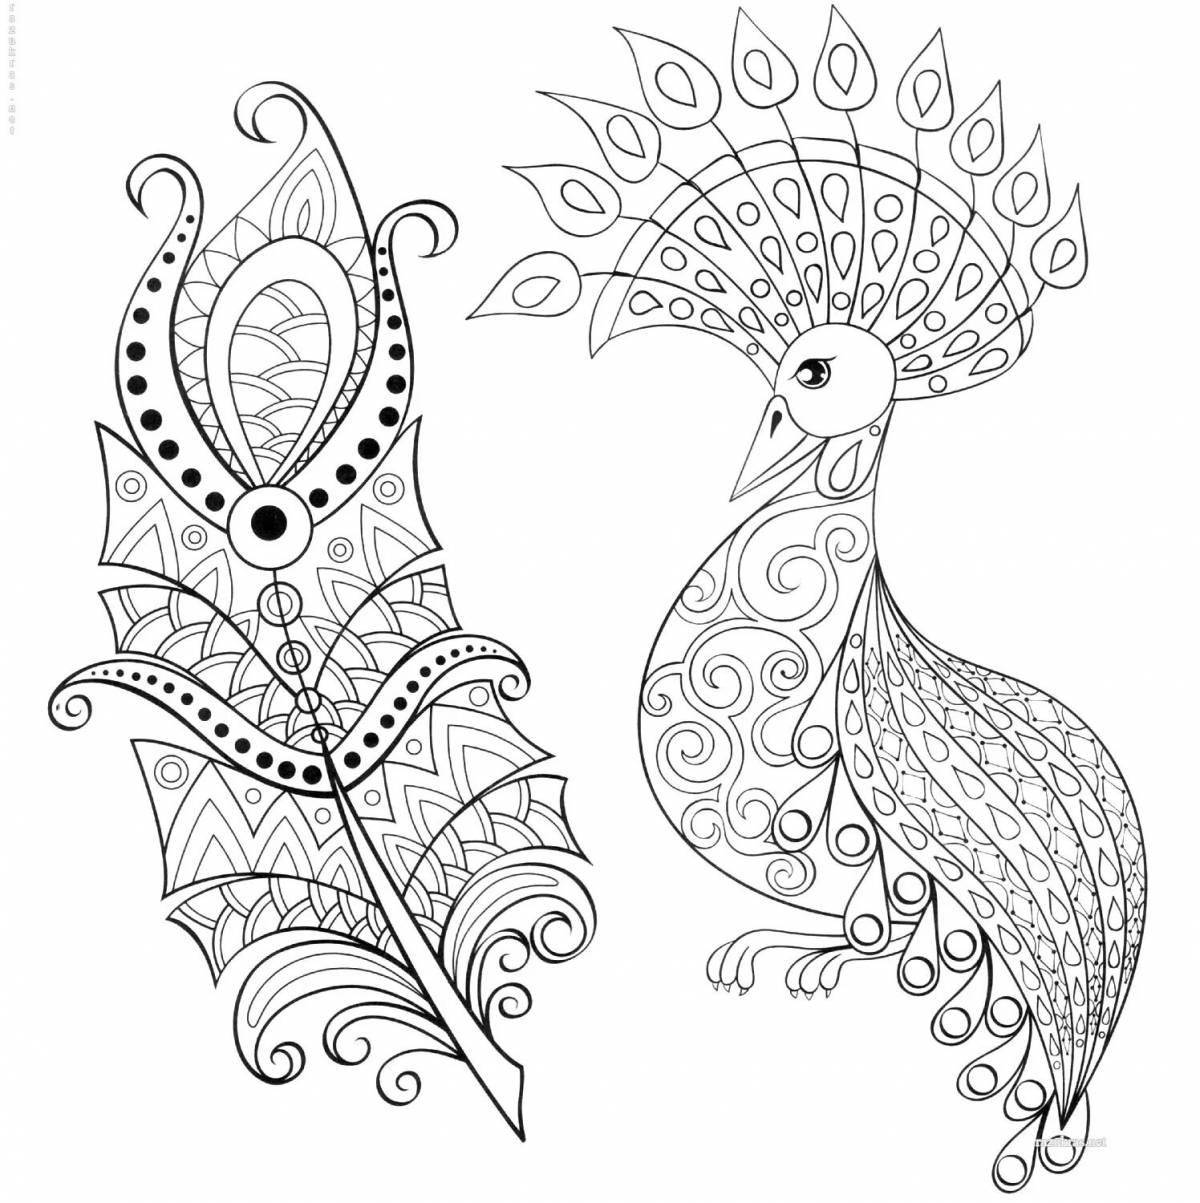 Coloring pages for kids with colorful peacock feathers